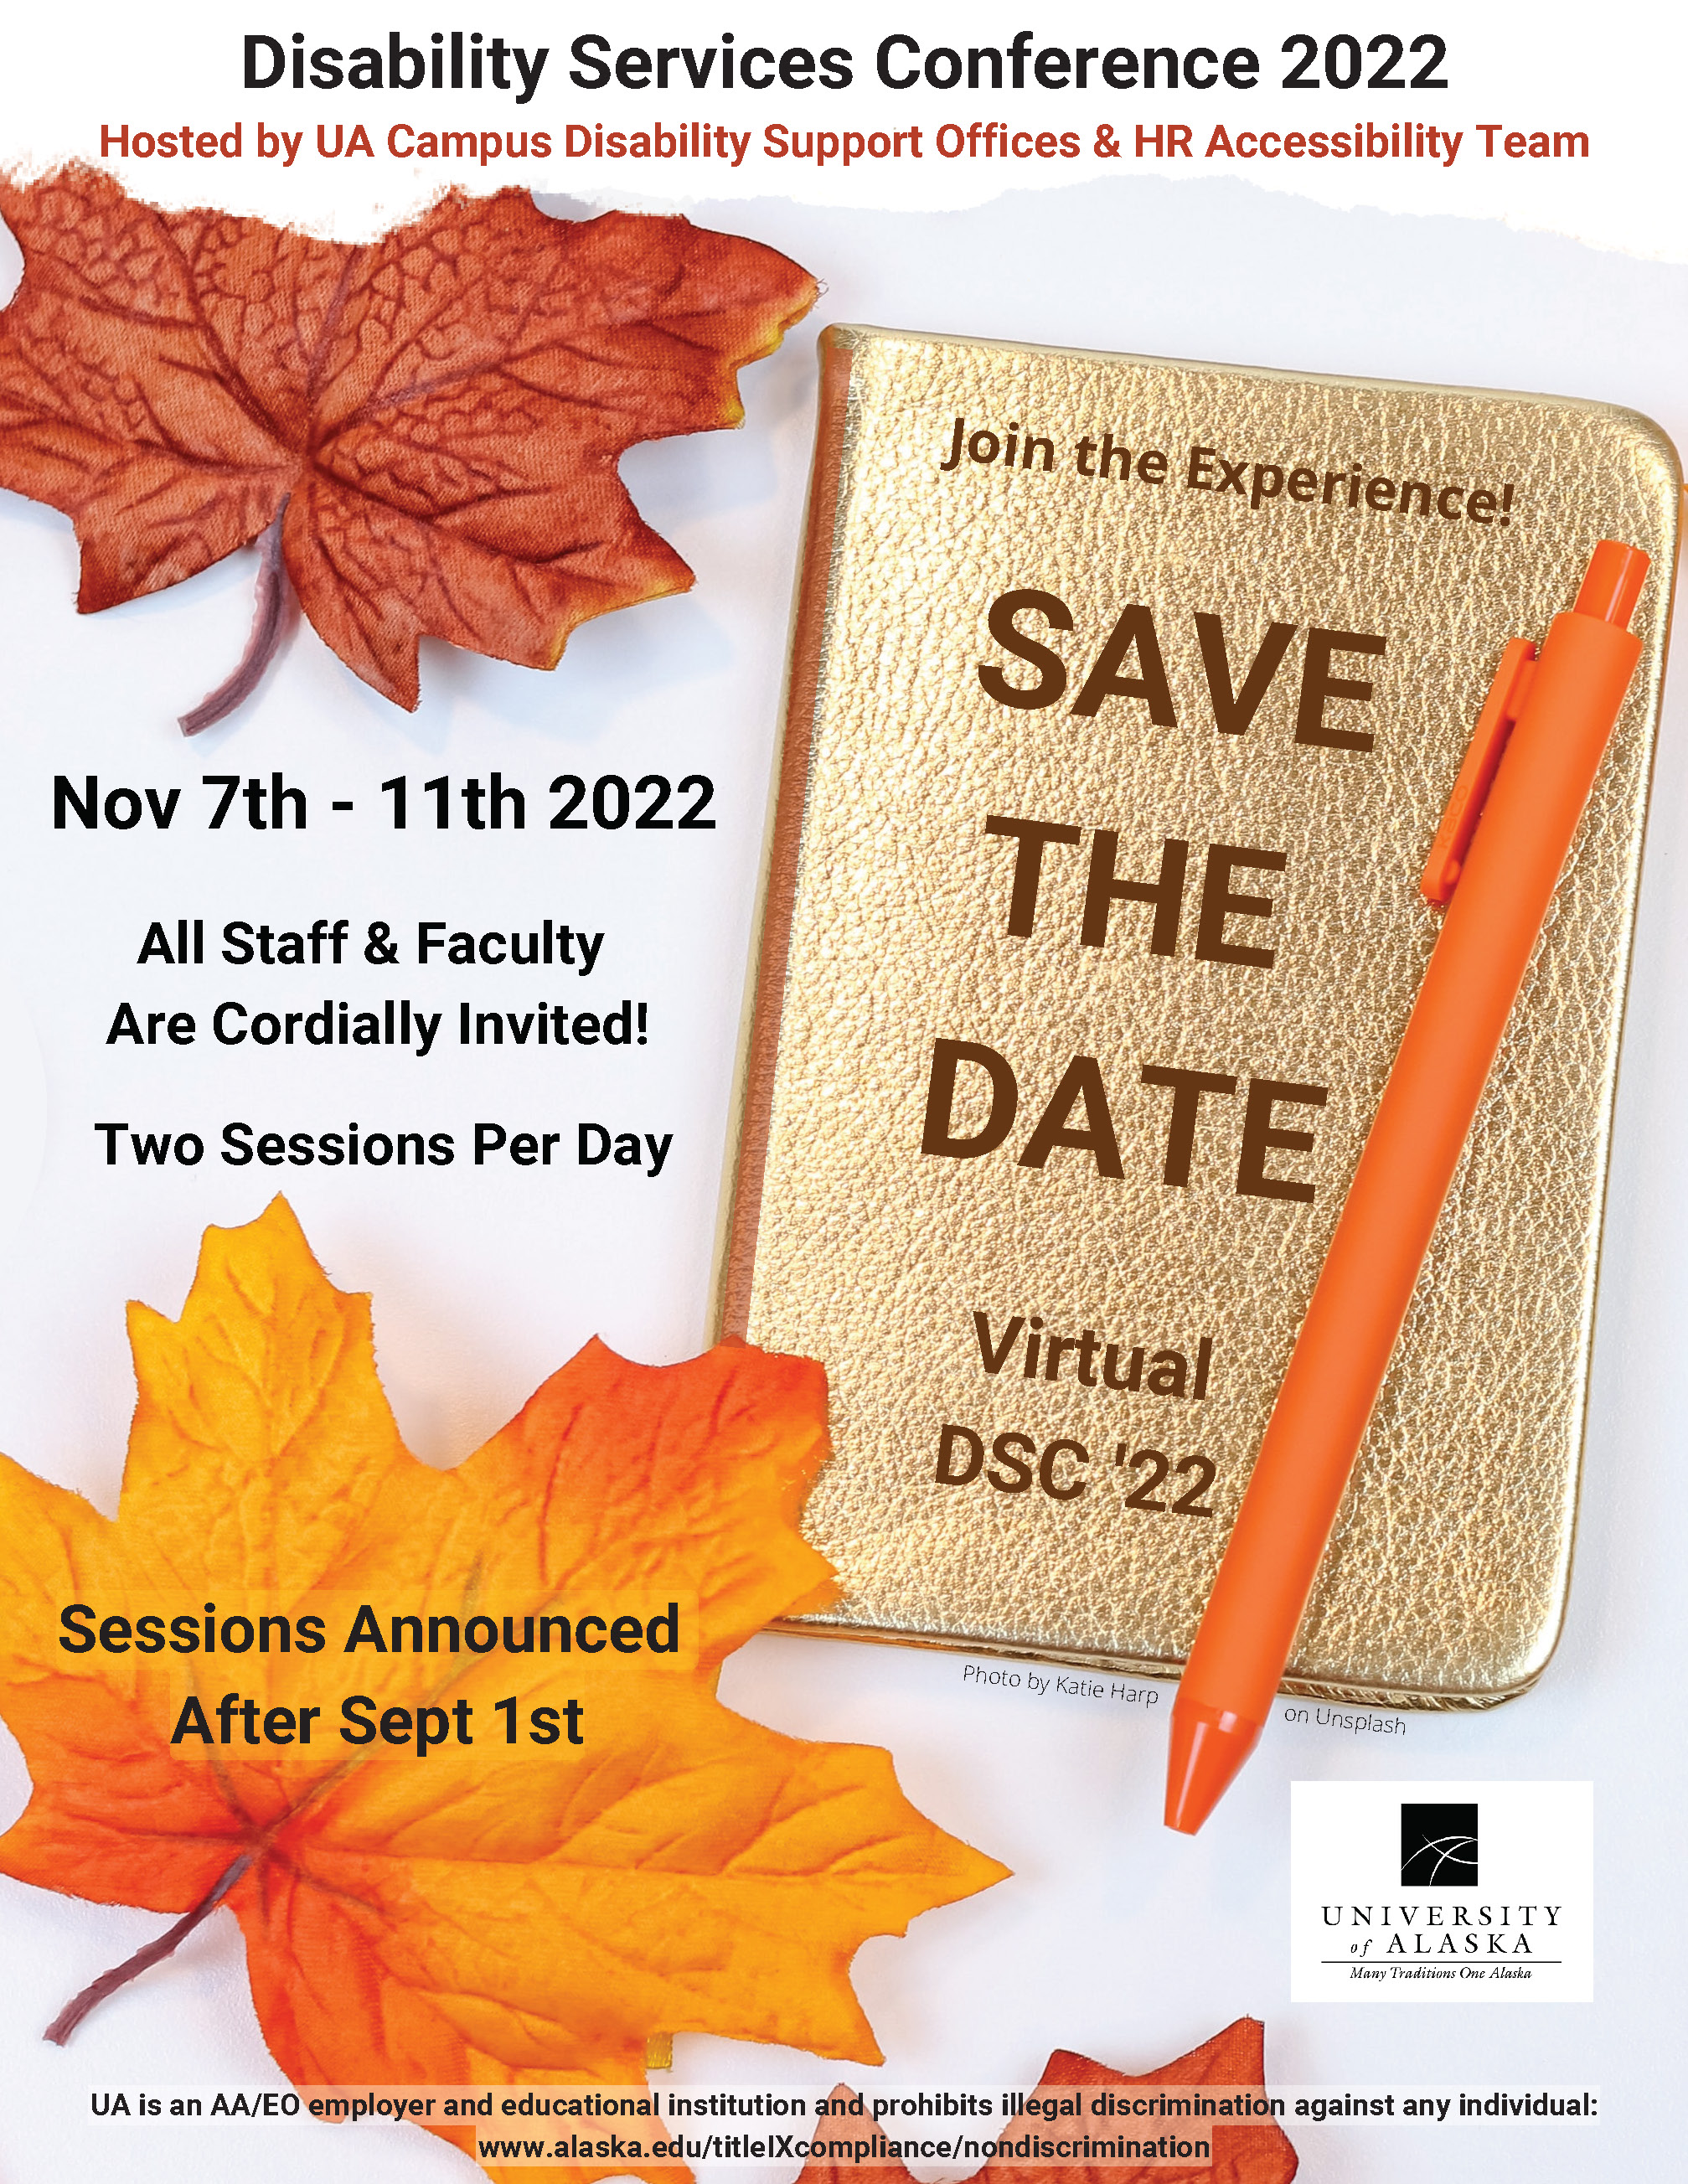 Save the date: 2022 Disability Services Conference, Nov. 7-11